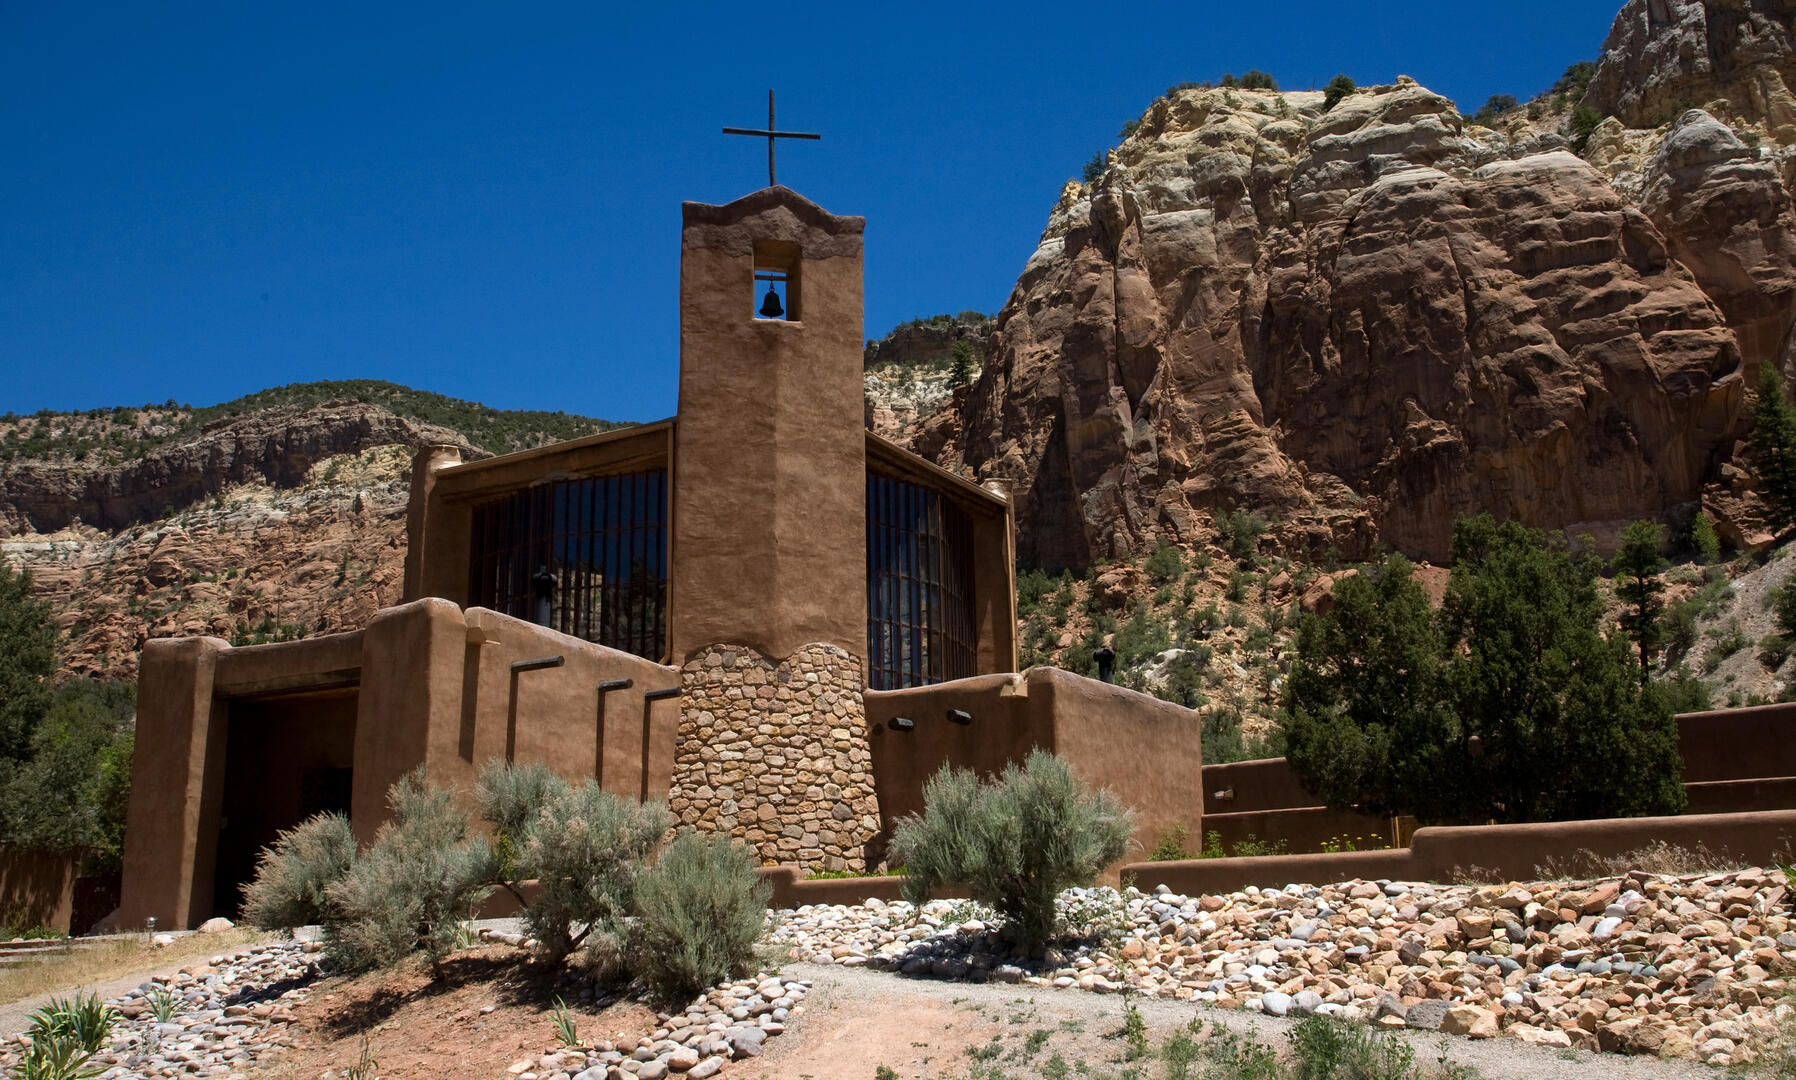 The Benedictine Monastery of Christ in the Desert in New Mexico is built from the same stone as the mesas that rise behind it, as though it had been carved out from them (photo: CNS).